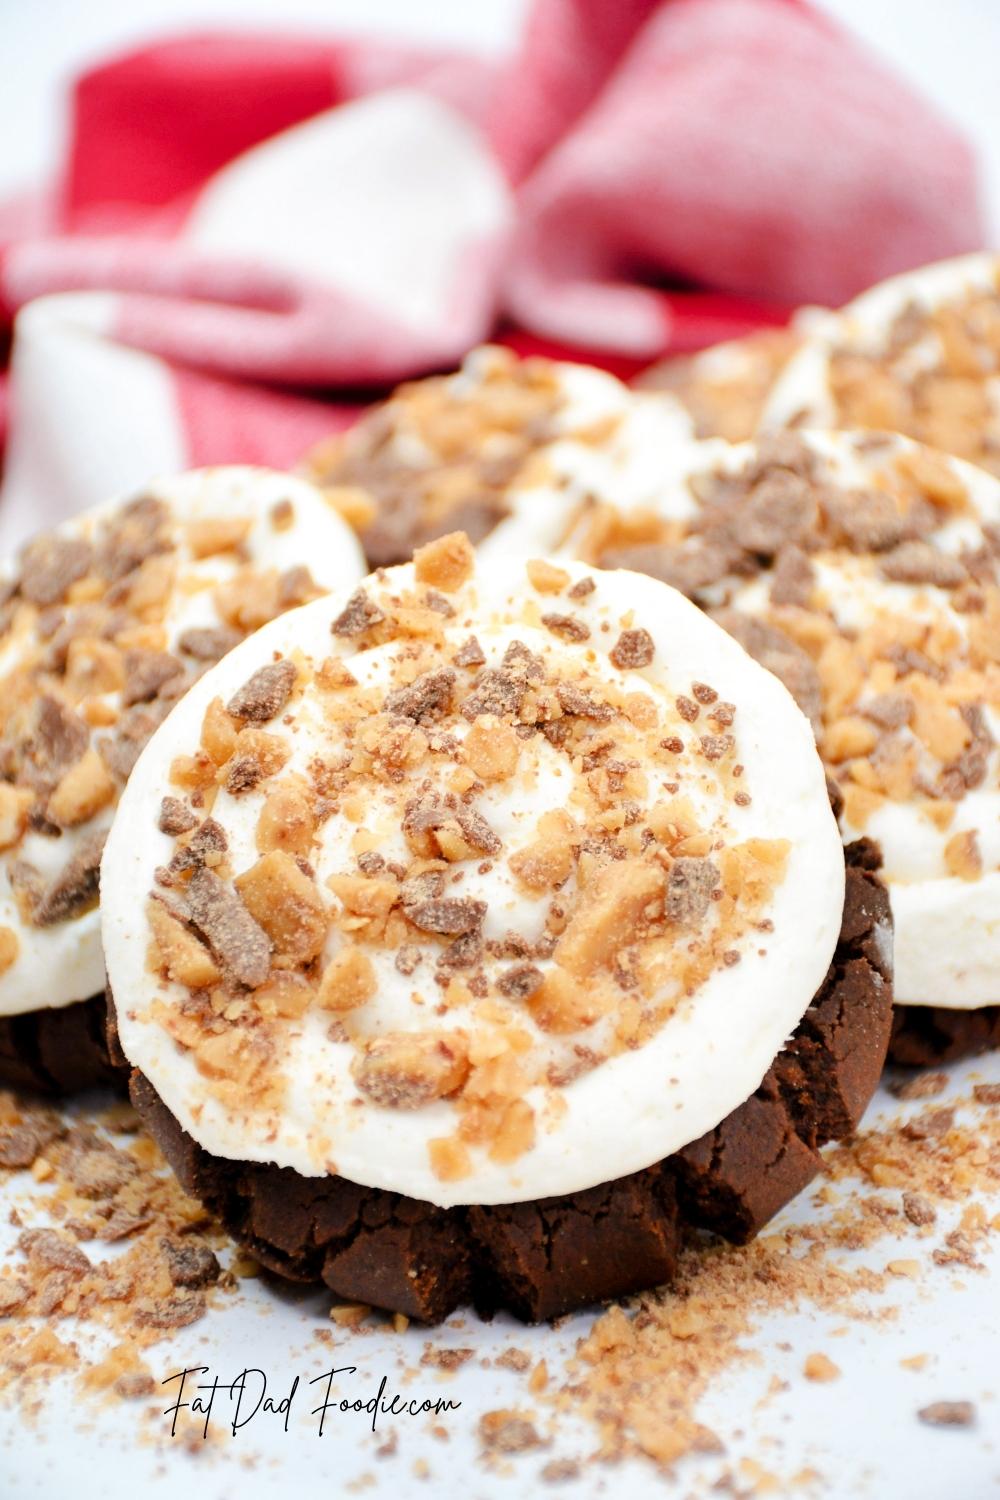 crumbl heath bar cookie recipe on red and white towel